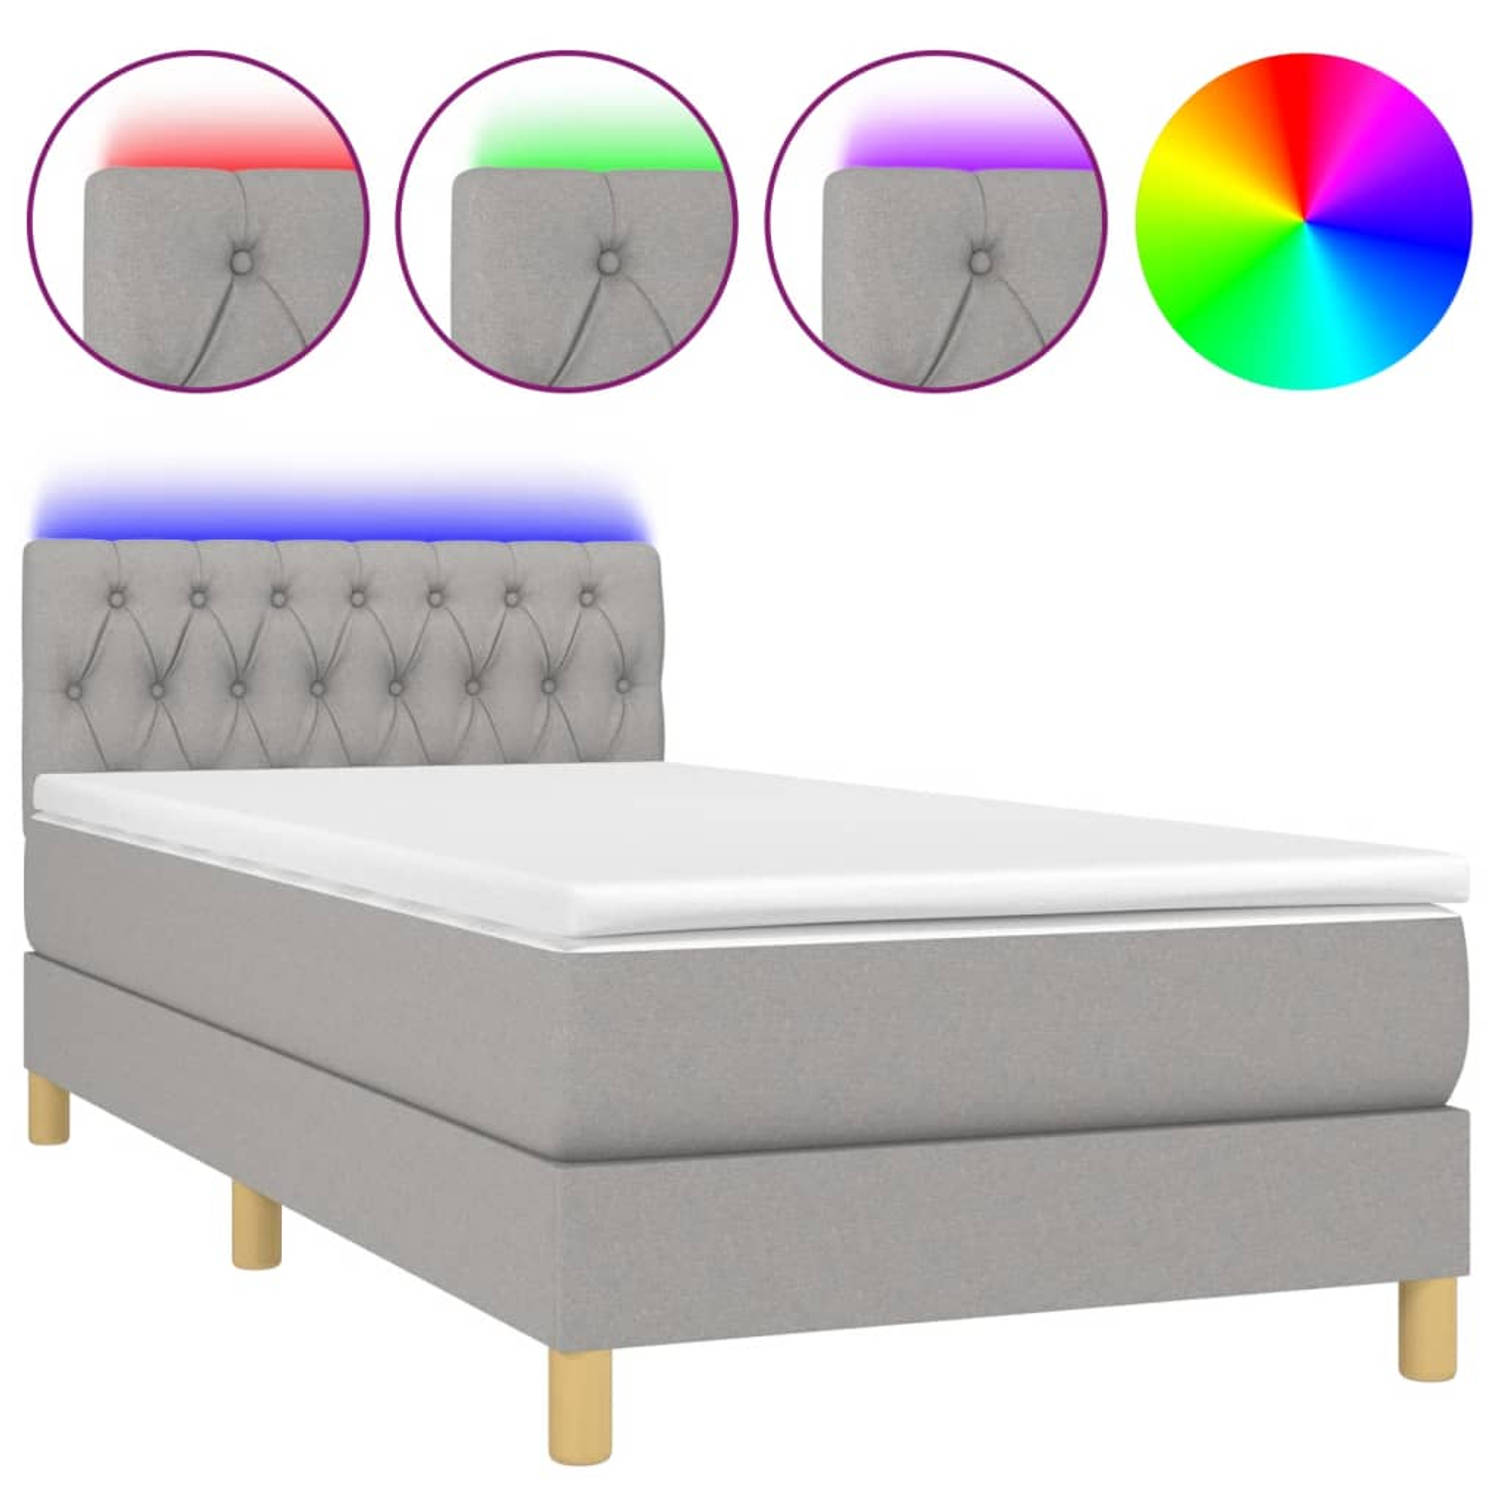 The Living Store Boxspring met matras en LED stof lichtgrijs 90x200 cm - Boxspring - Boxsprings - Bed - Slaapmeubel - Boxspringbed - Boxspring Bed - Tweepersoonsbed - Bed Met Matra